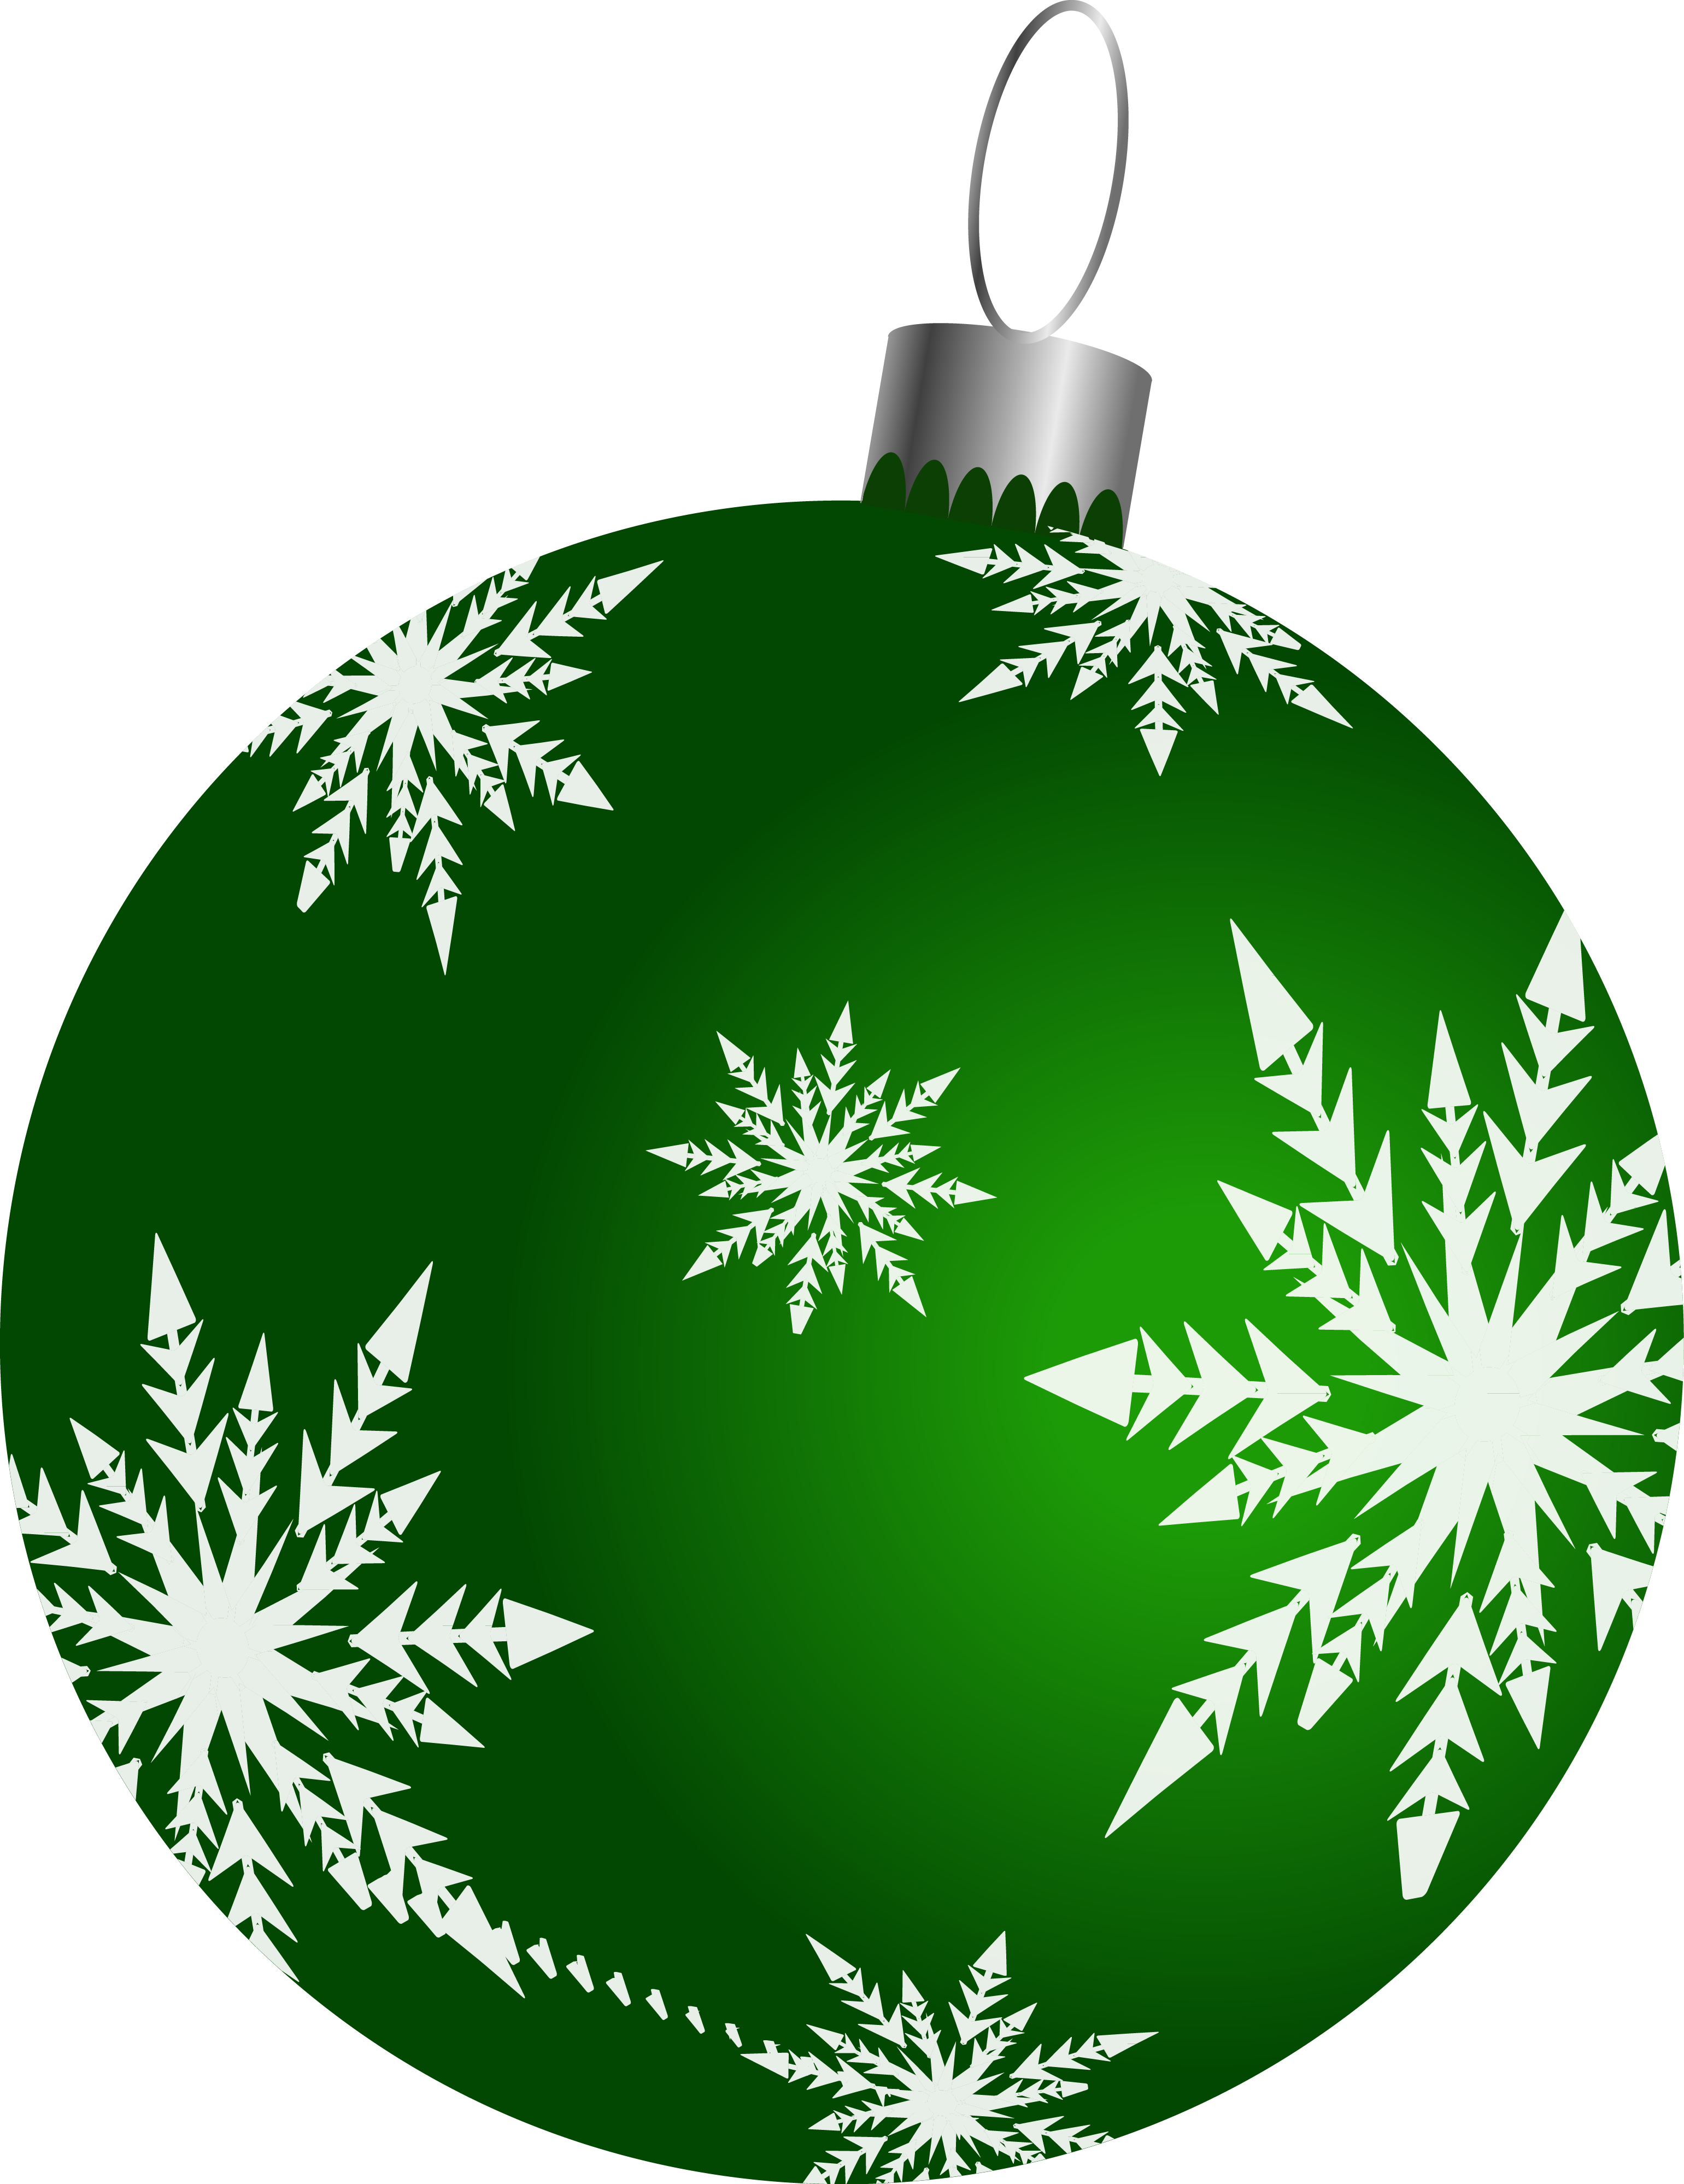 Download December Balls Tree Ornament Artificial Amazing Year Clipart ...